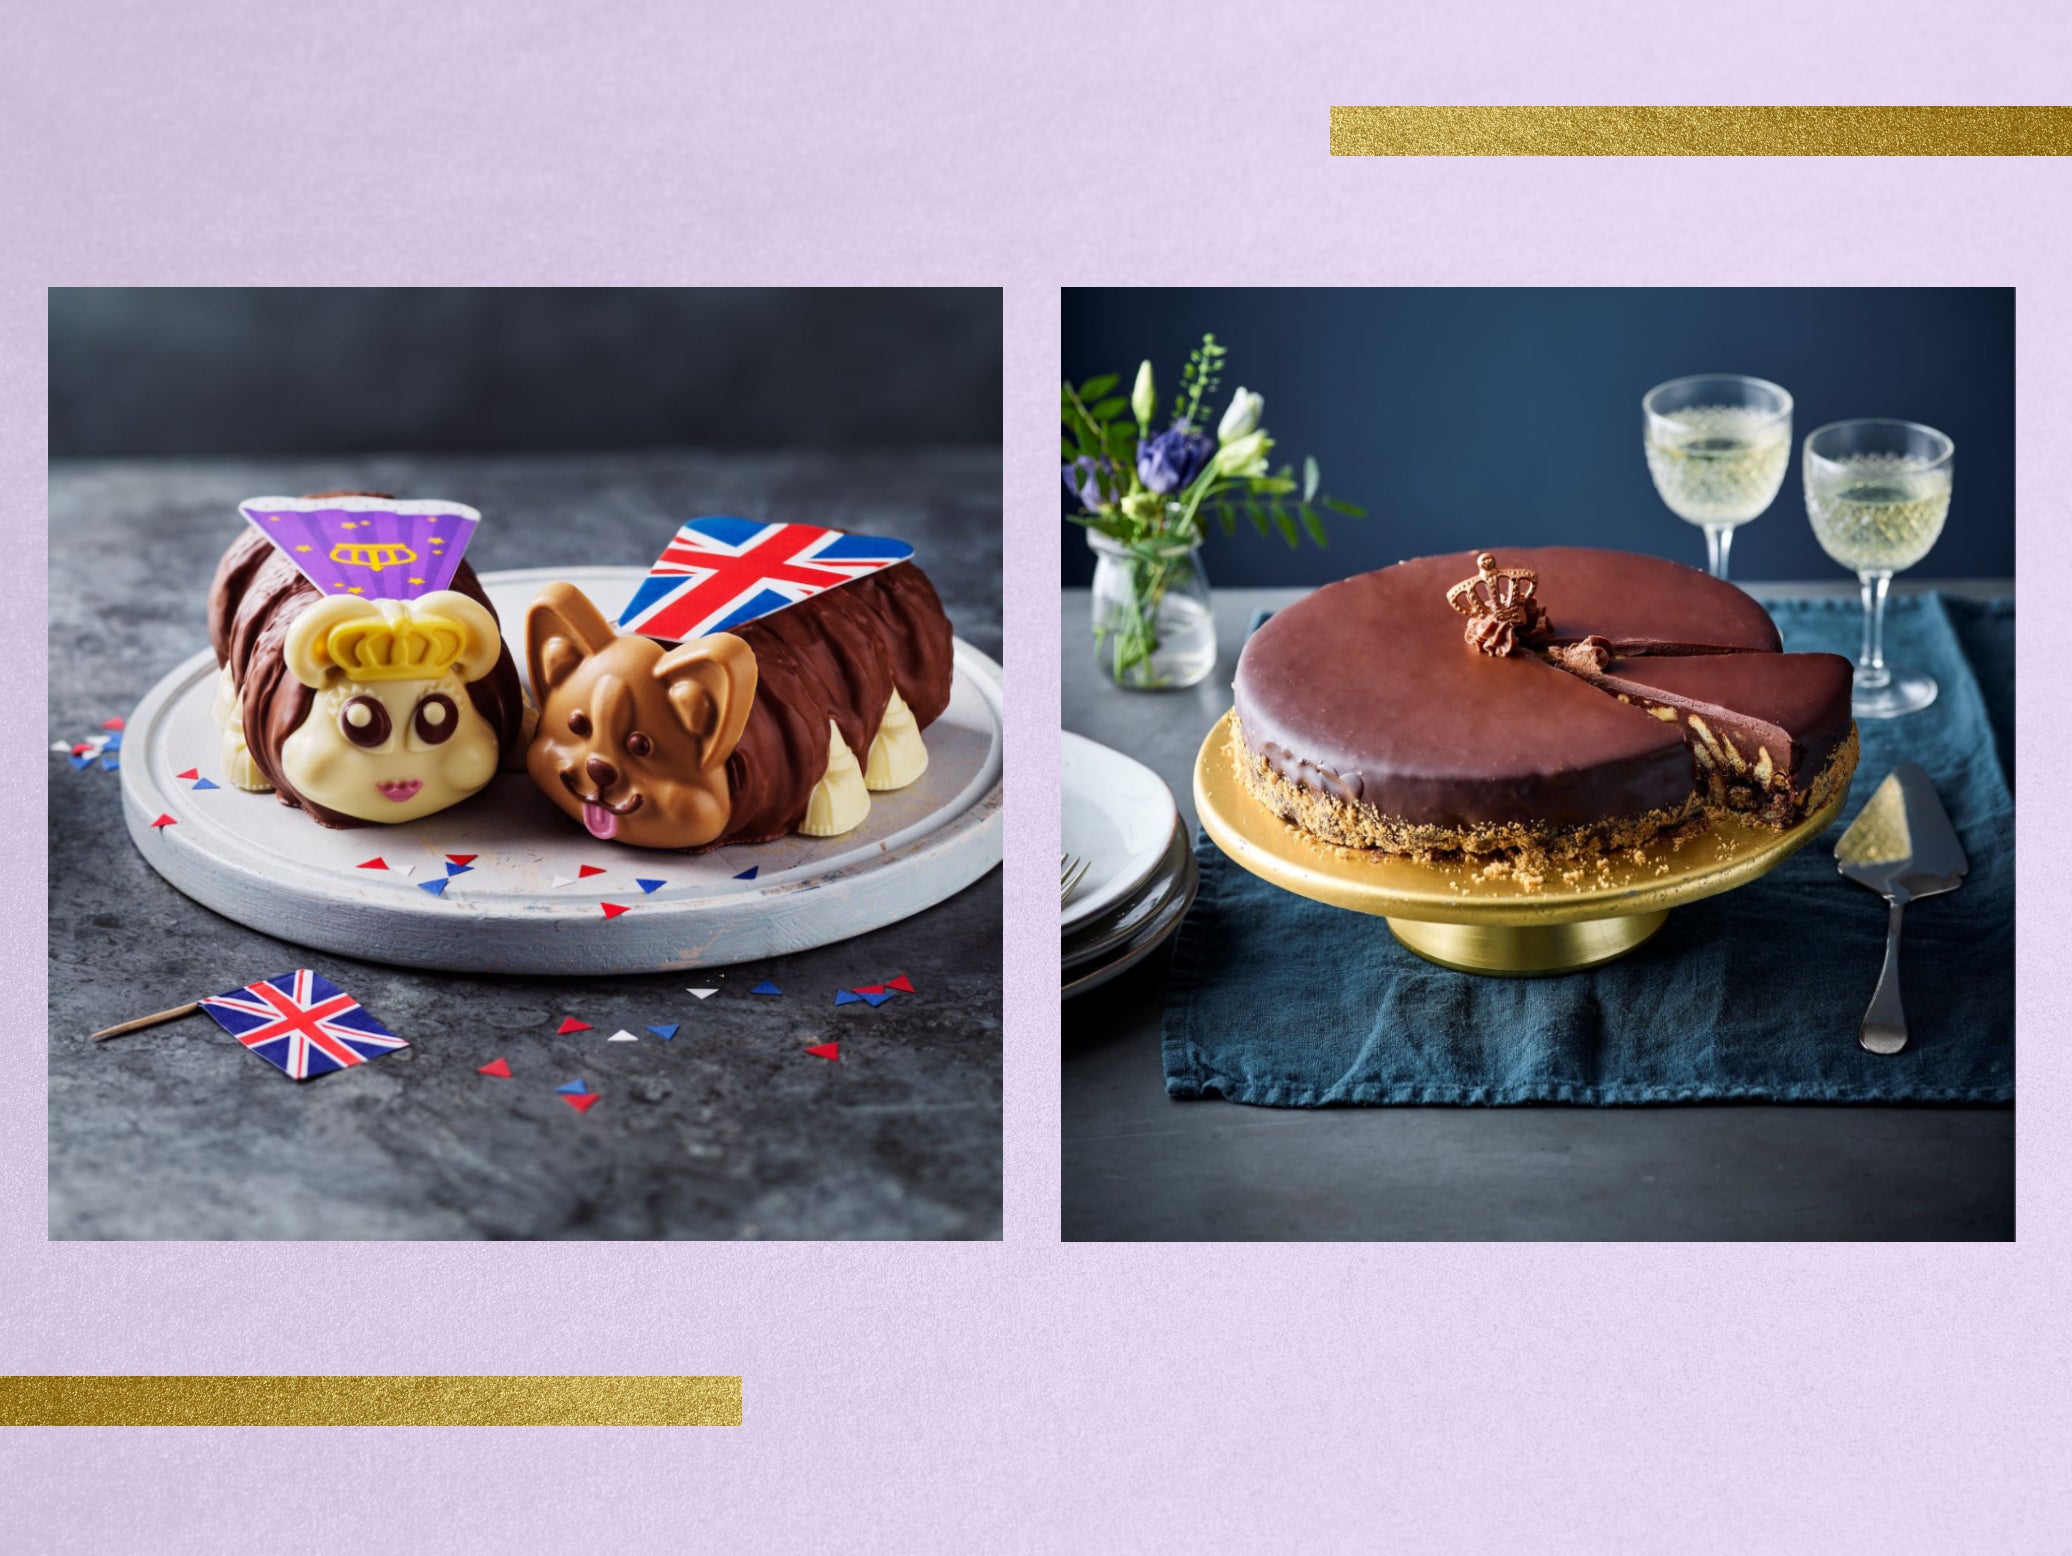 Skip straight to dessert with The Queen’s favourite cake